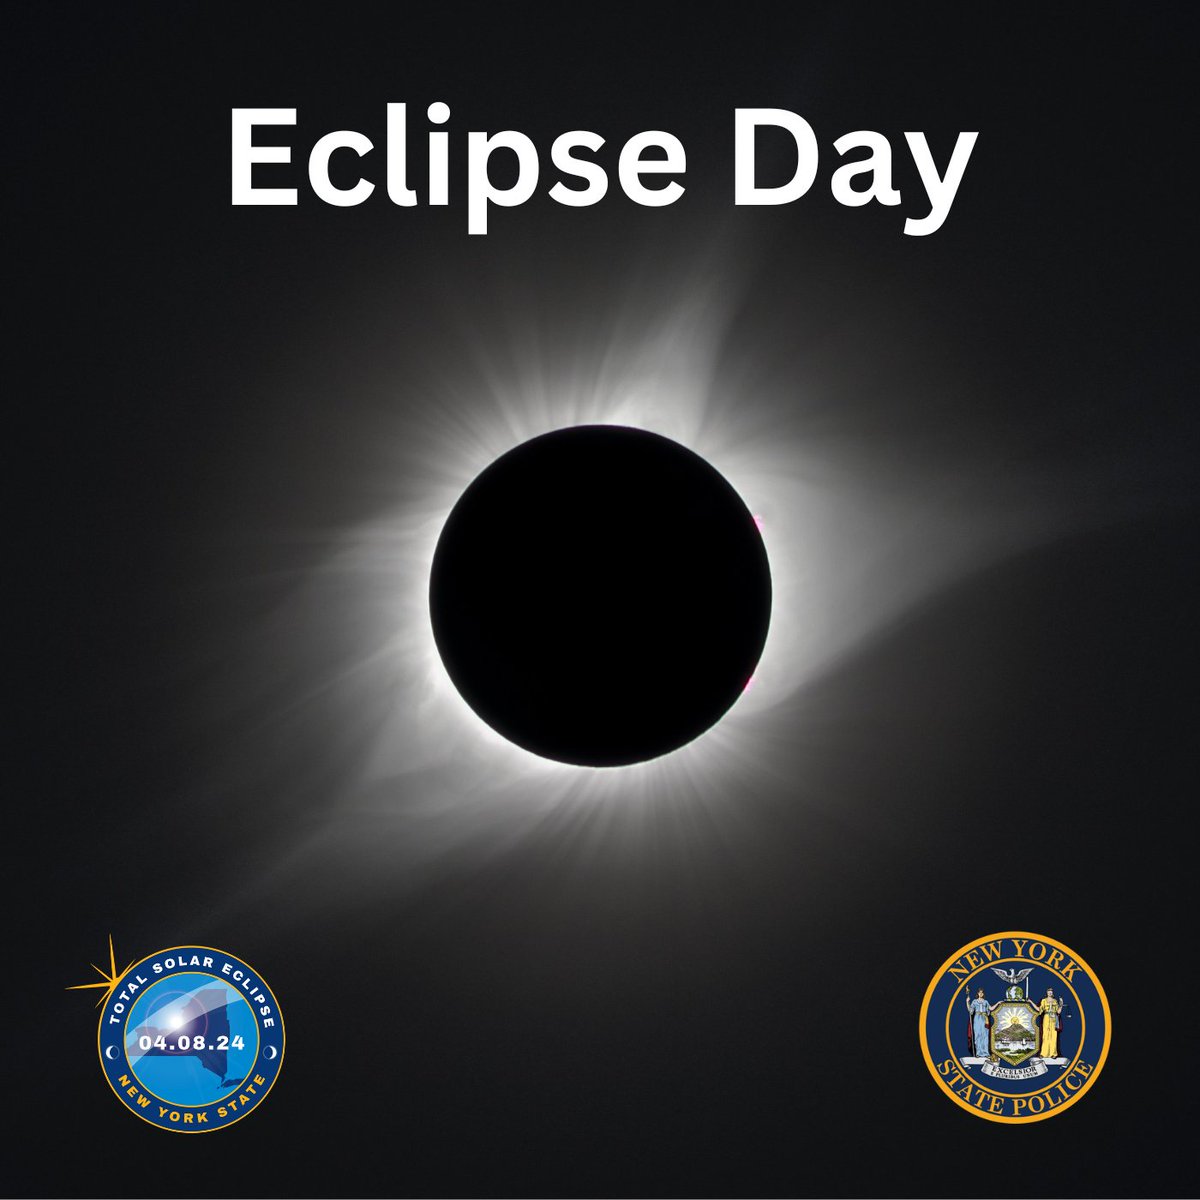 There is an expected high volume of car/foot traffic in the total eclipse viewing areas of NY. NYSP has extra Troopers staged throughout WNY, CNY, and Upstate NY. Multiple local first responding agencies will be staged throughout the State as well. call 911 for any emergencies.